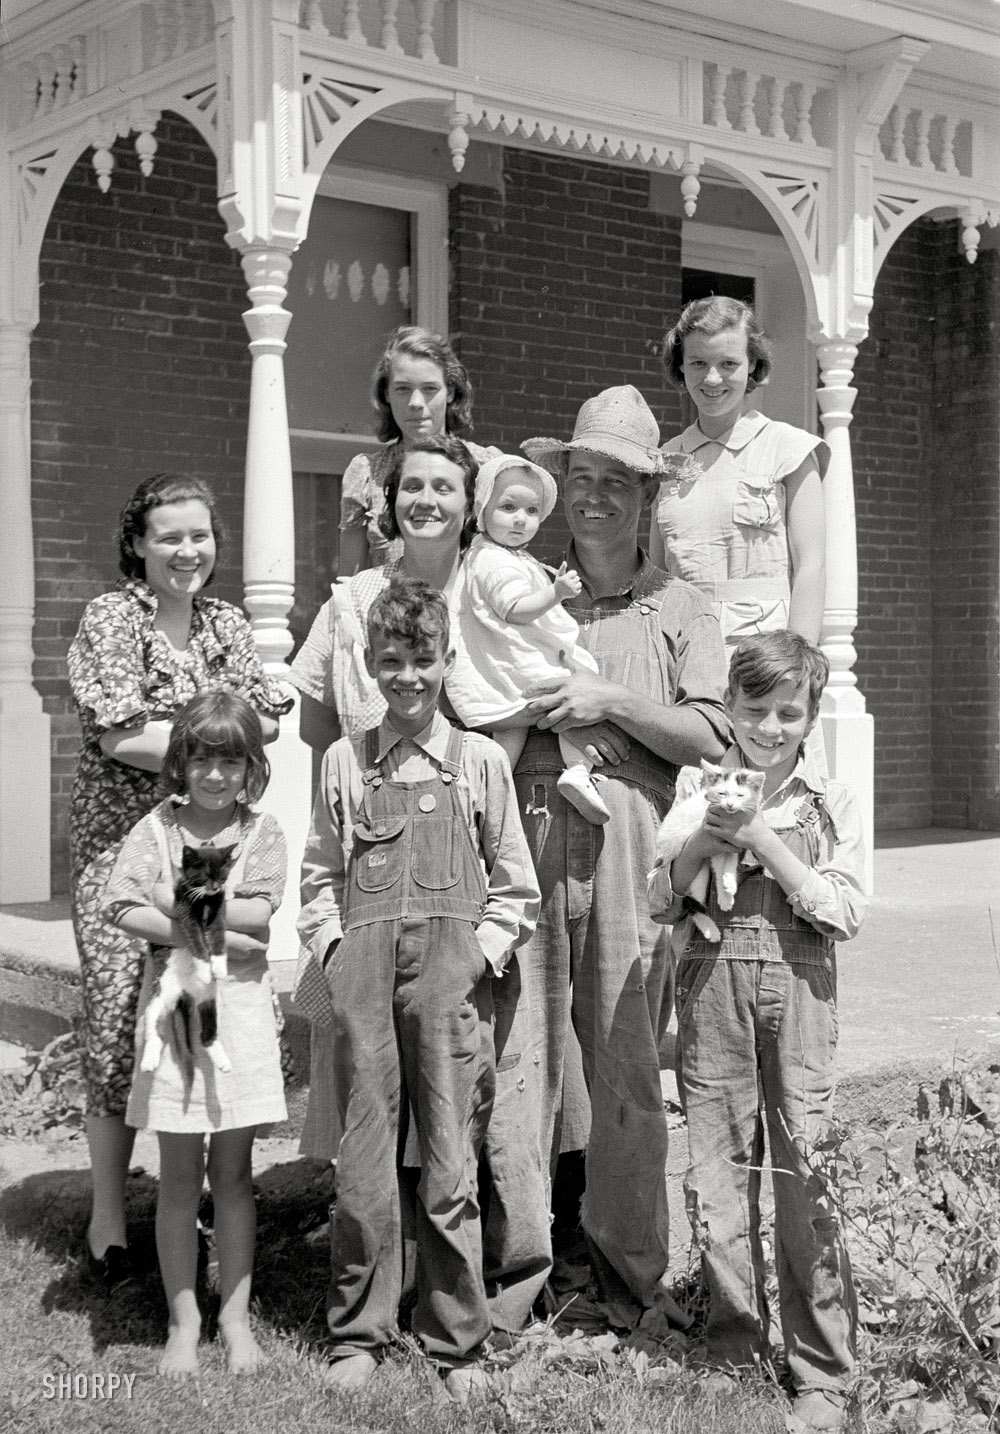 May 1938. "Farm family, Scioto Farms, Ohio." 35mm nitrate negative by Arthur Rothstein for the Farm Security Administration. View full size.
UPDATE: This is Earl Armentrout and his family, government rehabilitation clients who were relocated by the Resettlement Administration to a new house in a cooperative farming project, a story repeated thousands of times for families who were forced off the land by crop failures during the Dust Bowl era.